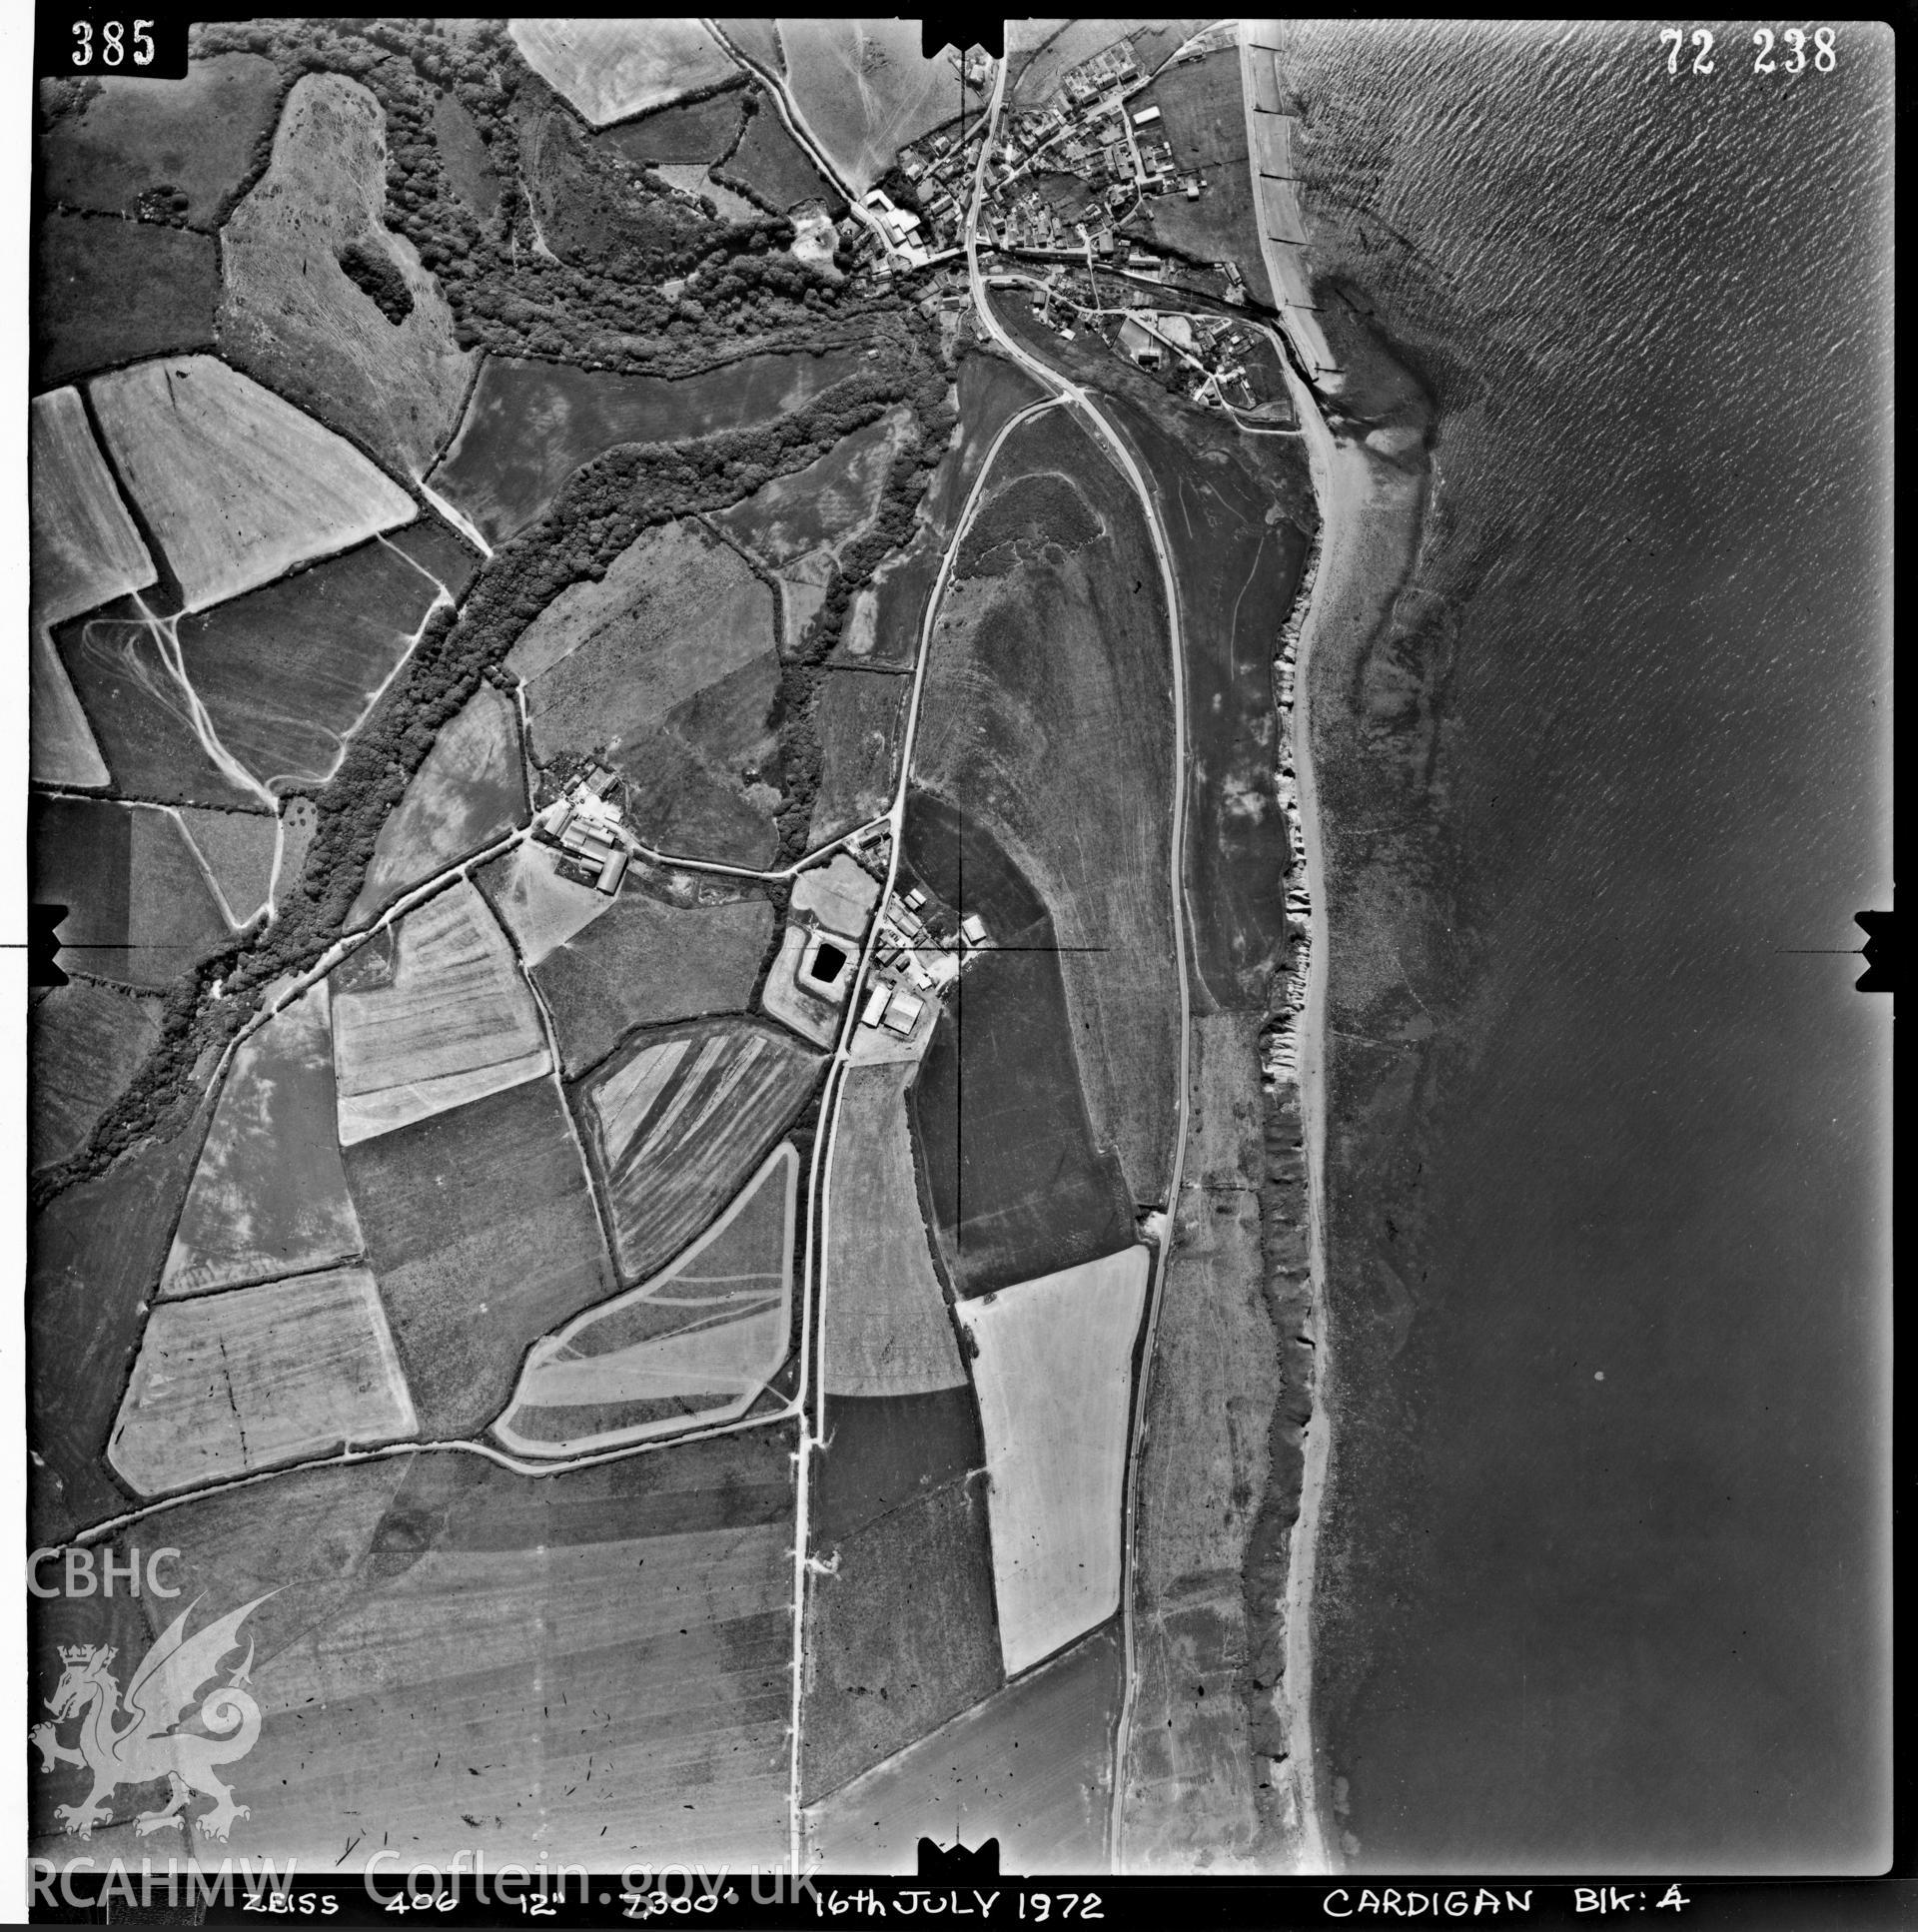 Digitized copy of an aerial photograph showing Aberaeron area, taken by Ordnance Survey, 1972.